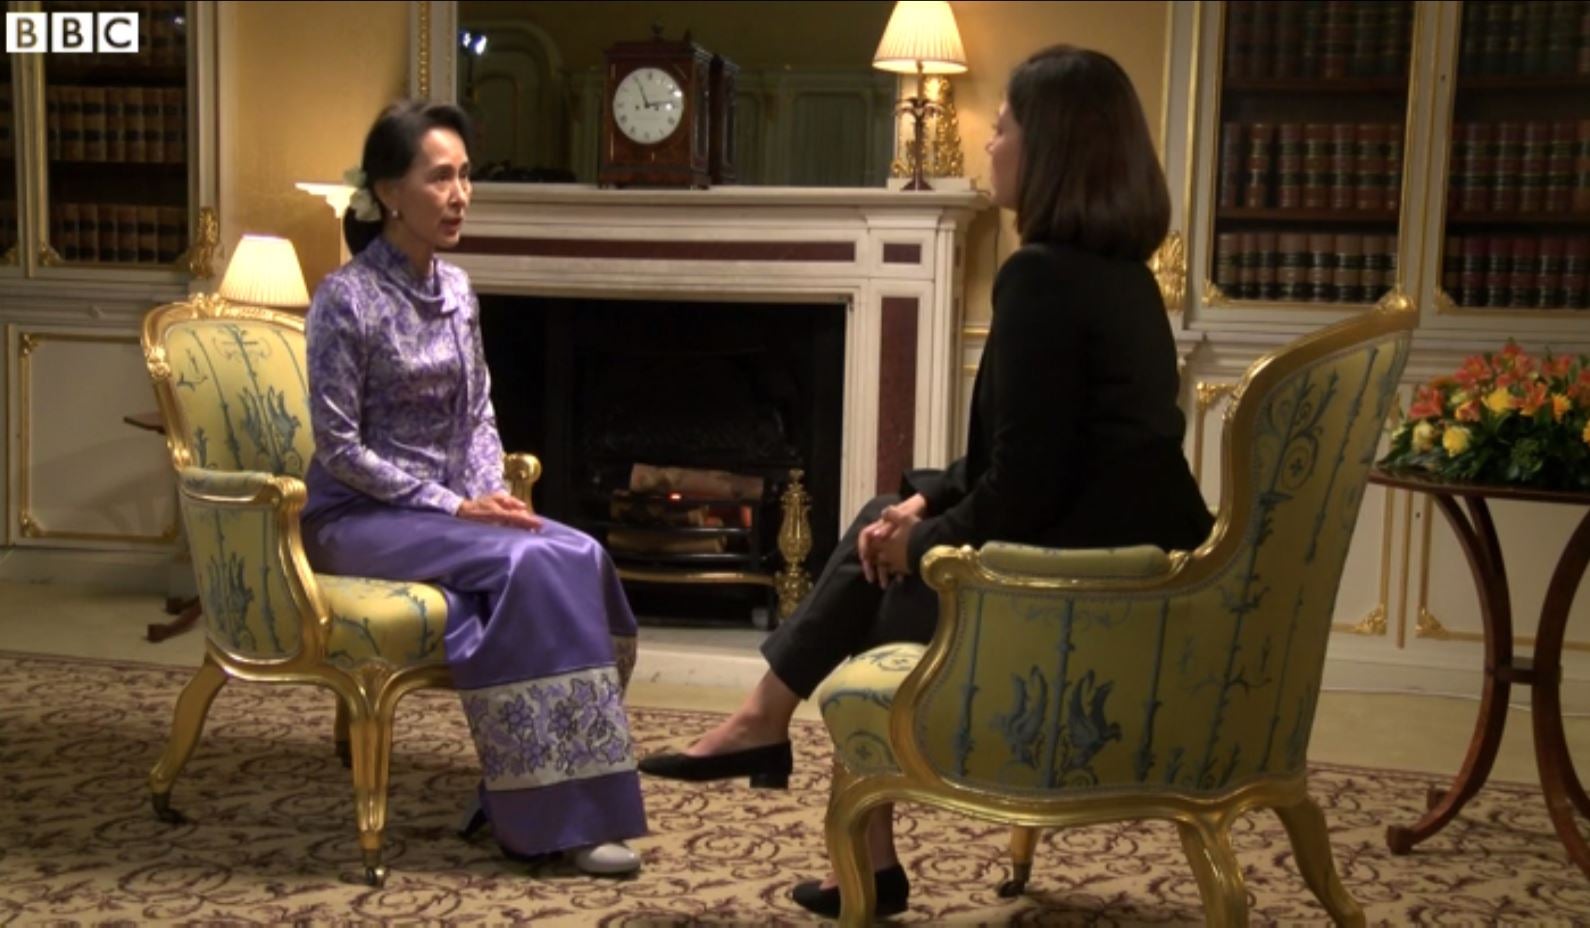 Aung San Suu Kyi during the BBC interview